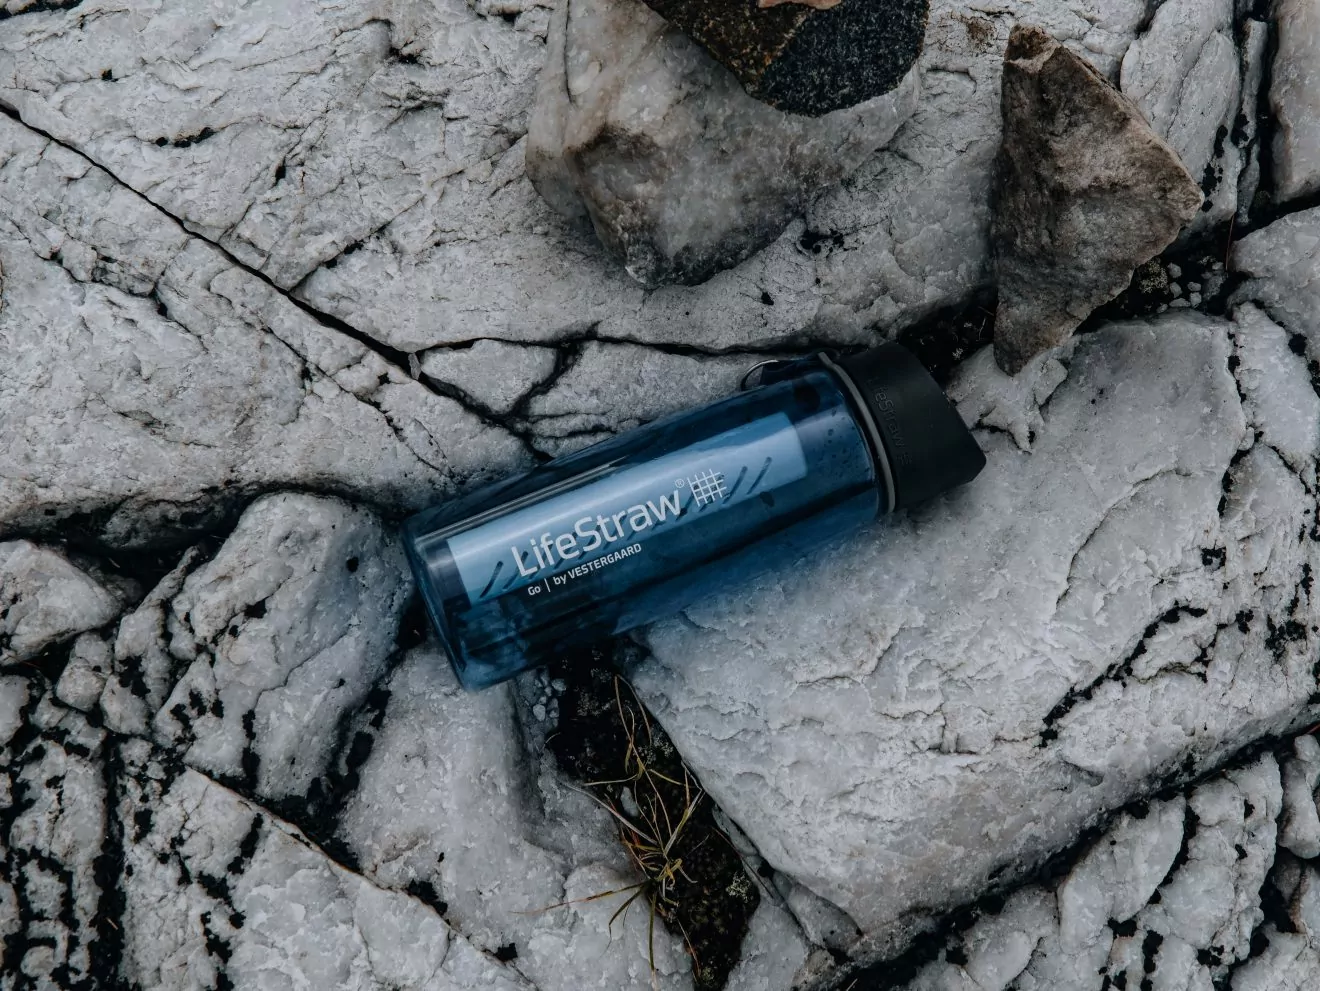 Lifestraw water bottle lying on rocks for water filtration while hiking